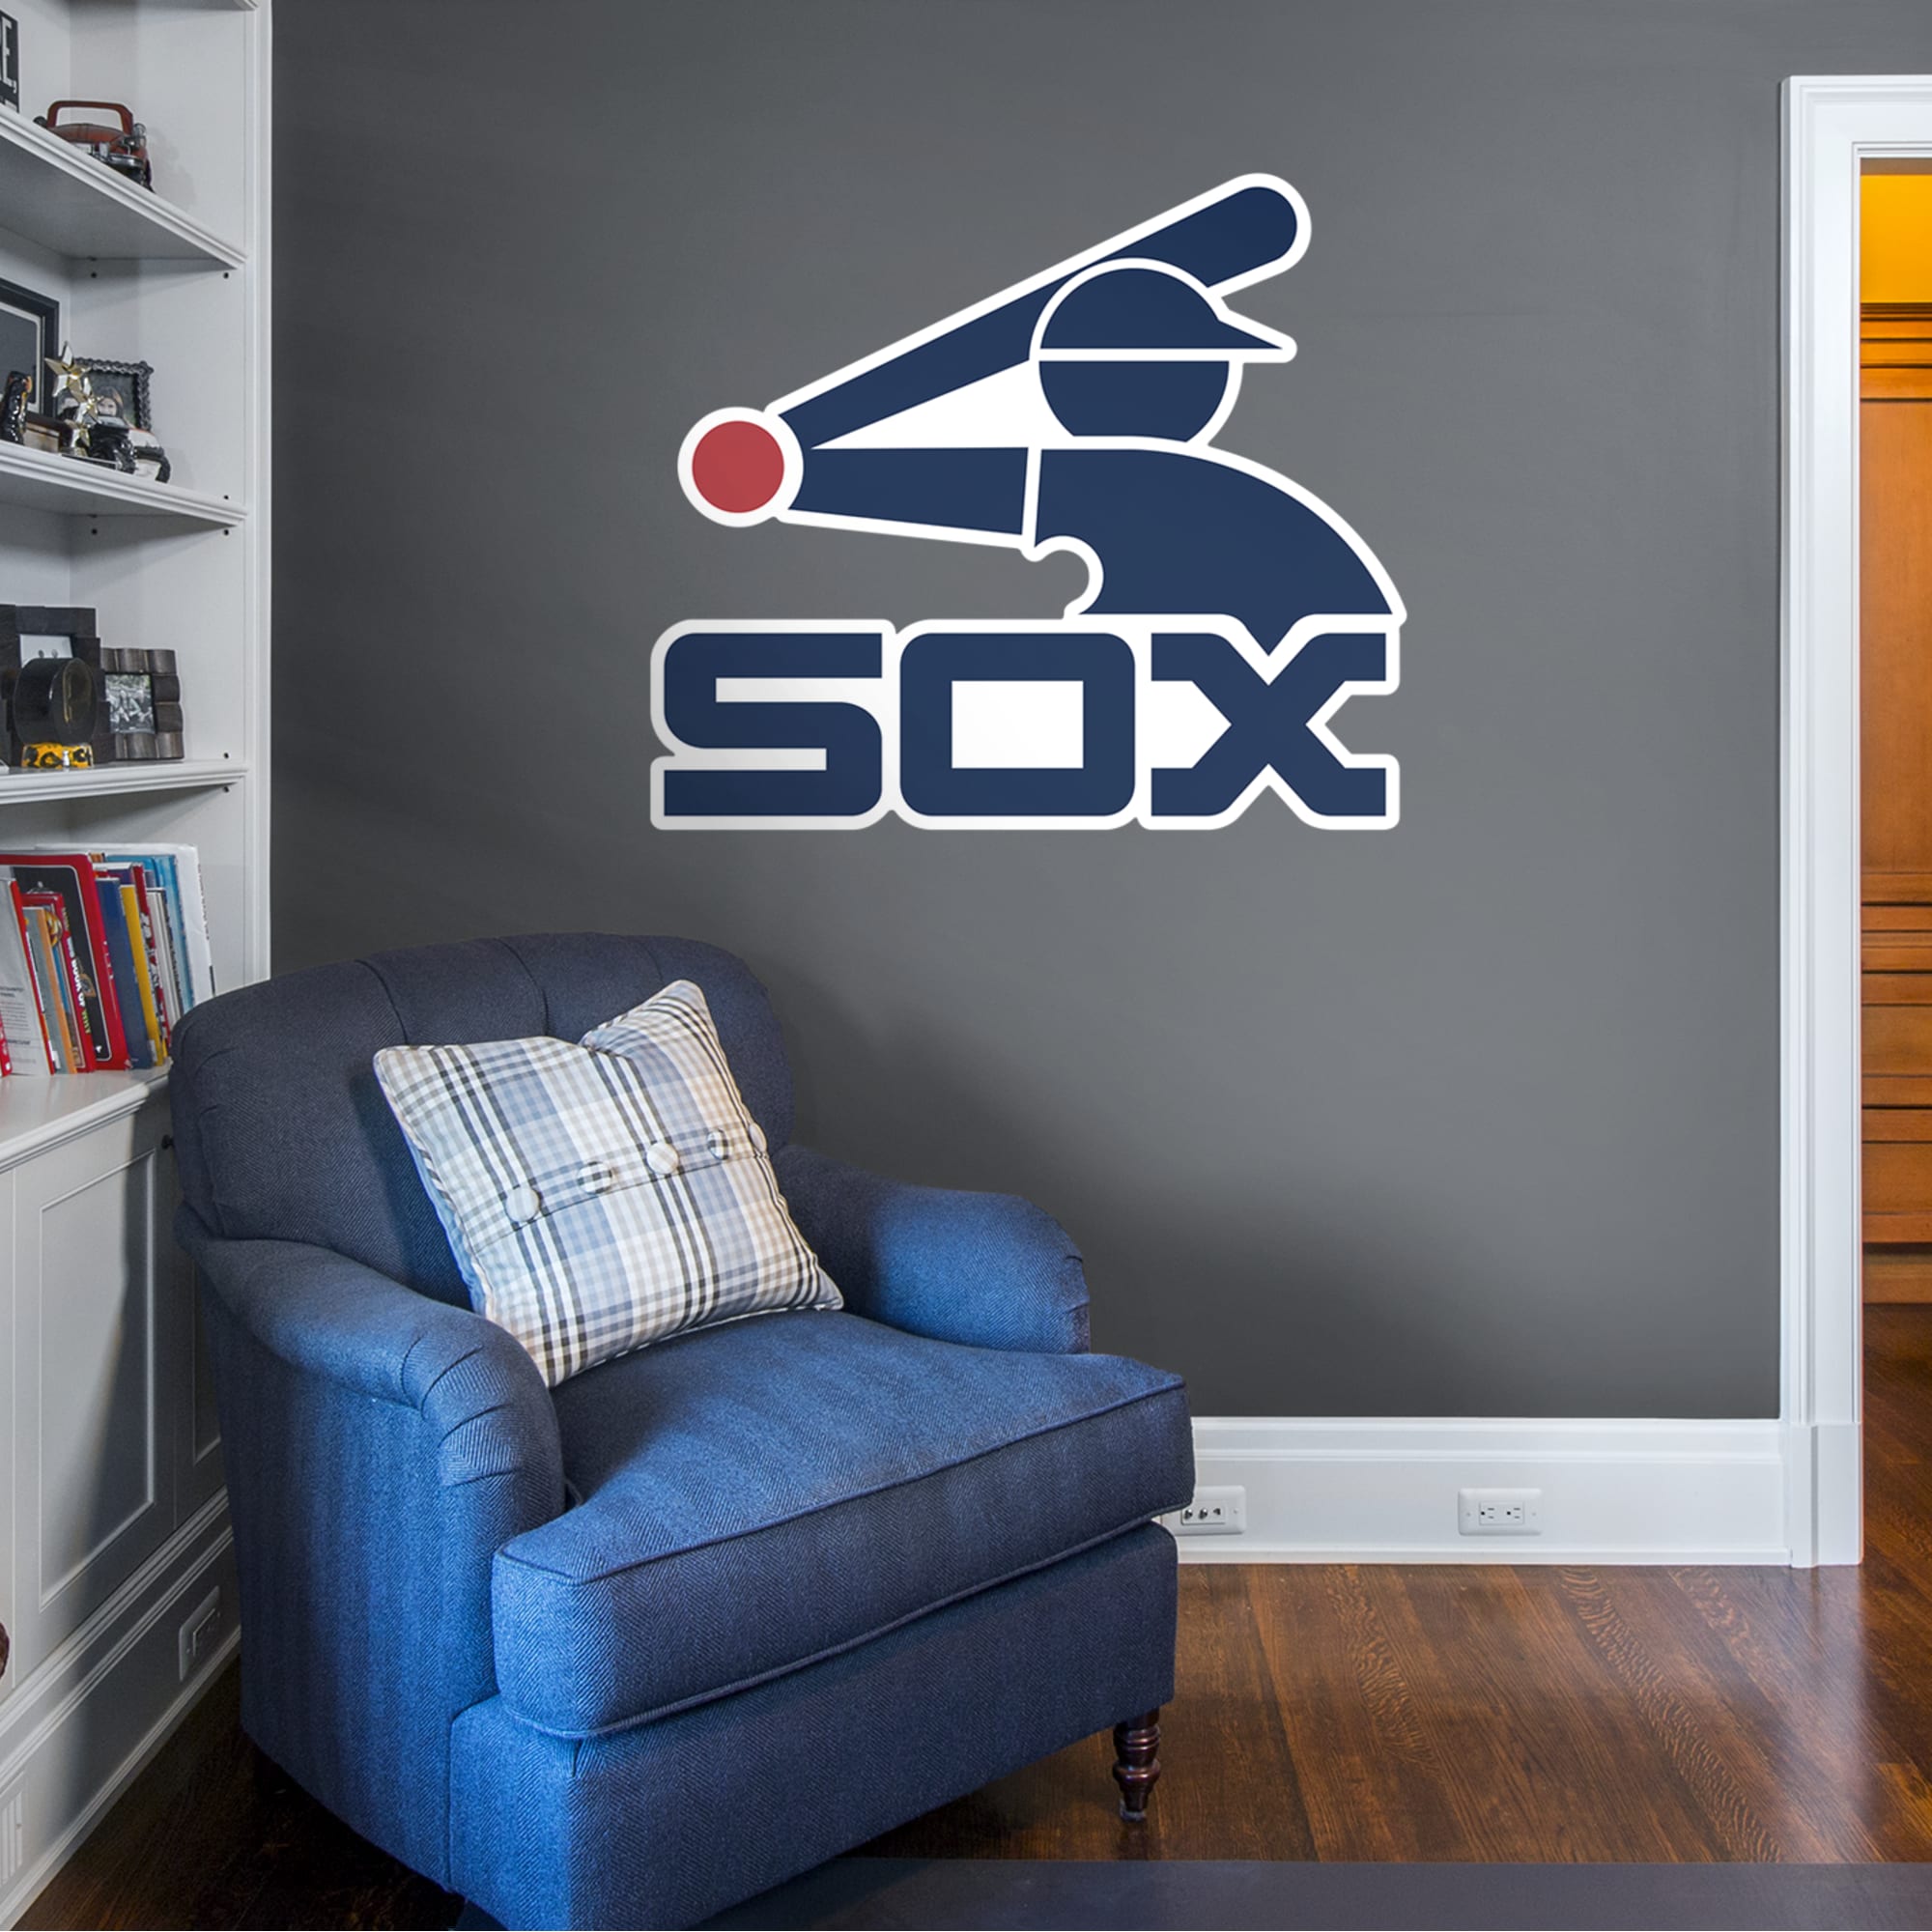 Chicago White Sox: Comiskey Park Stadium Mural - Officially Licensed M –  Fathead